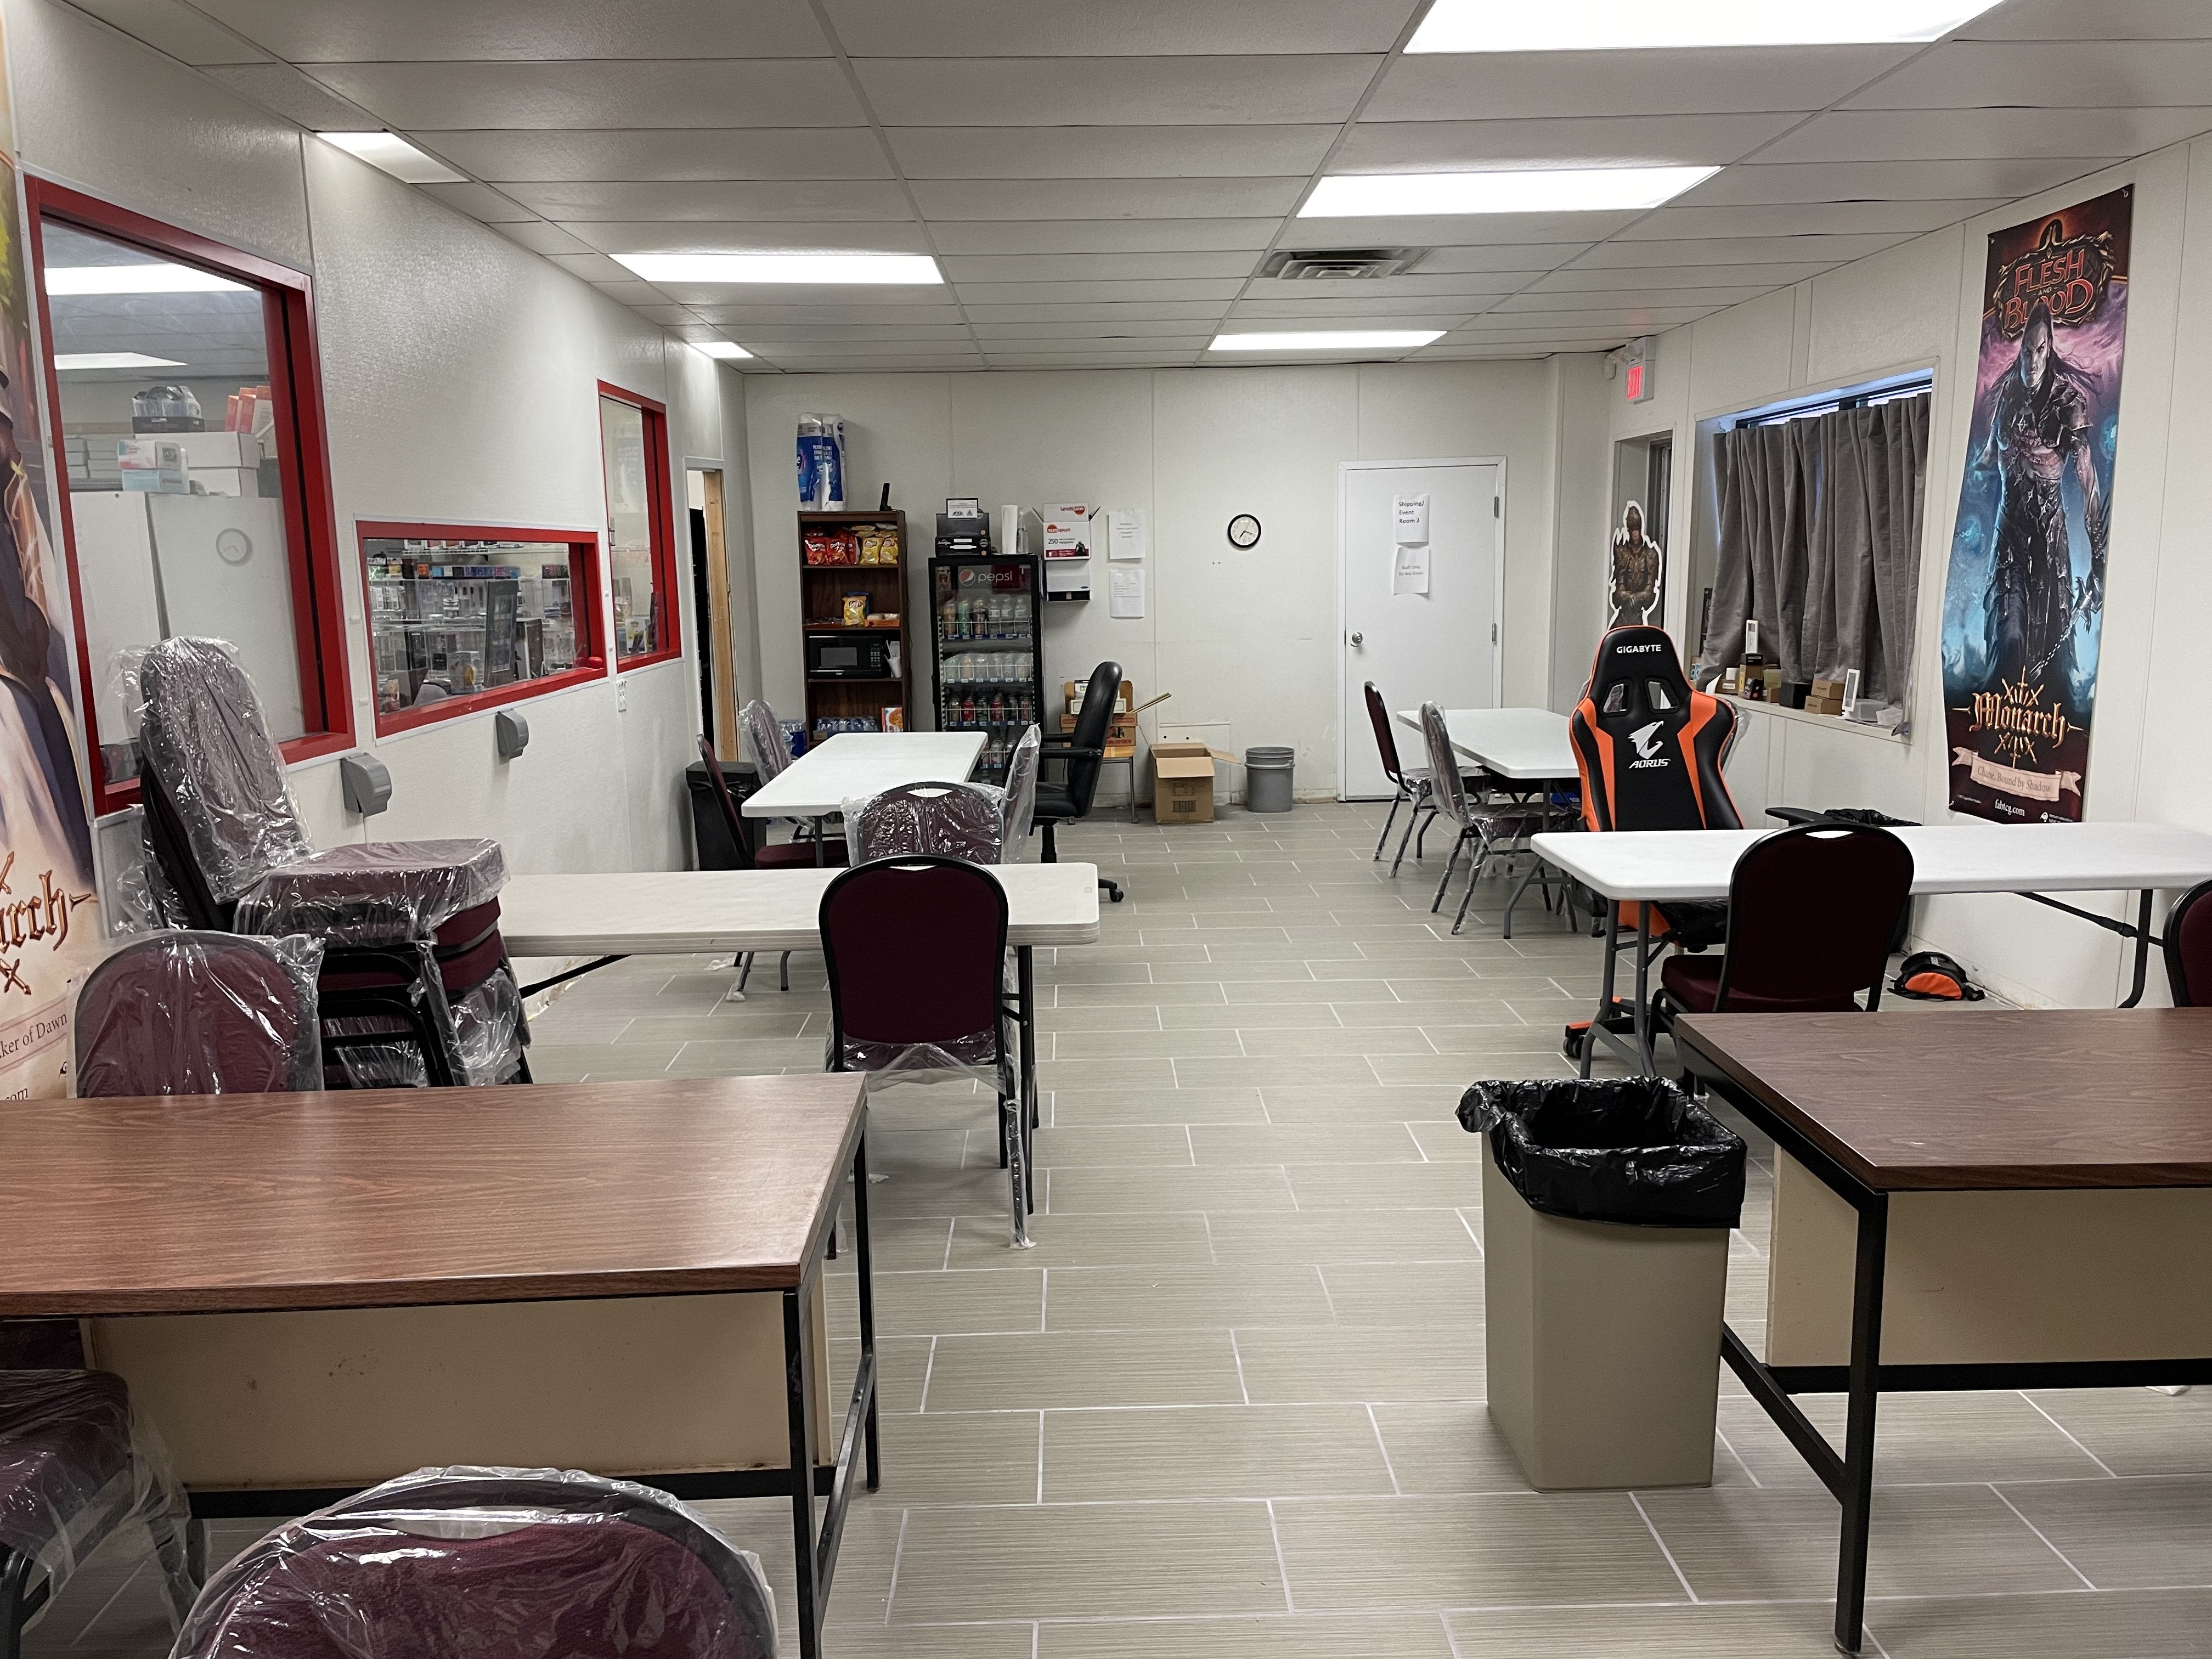 In Store News - Event Area Renovations Complete